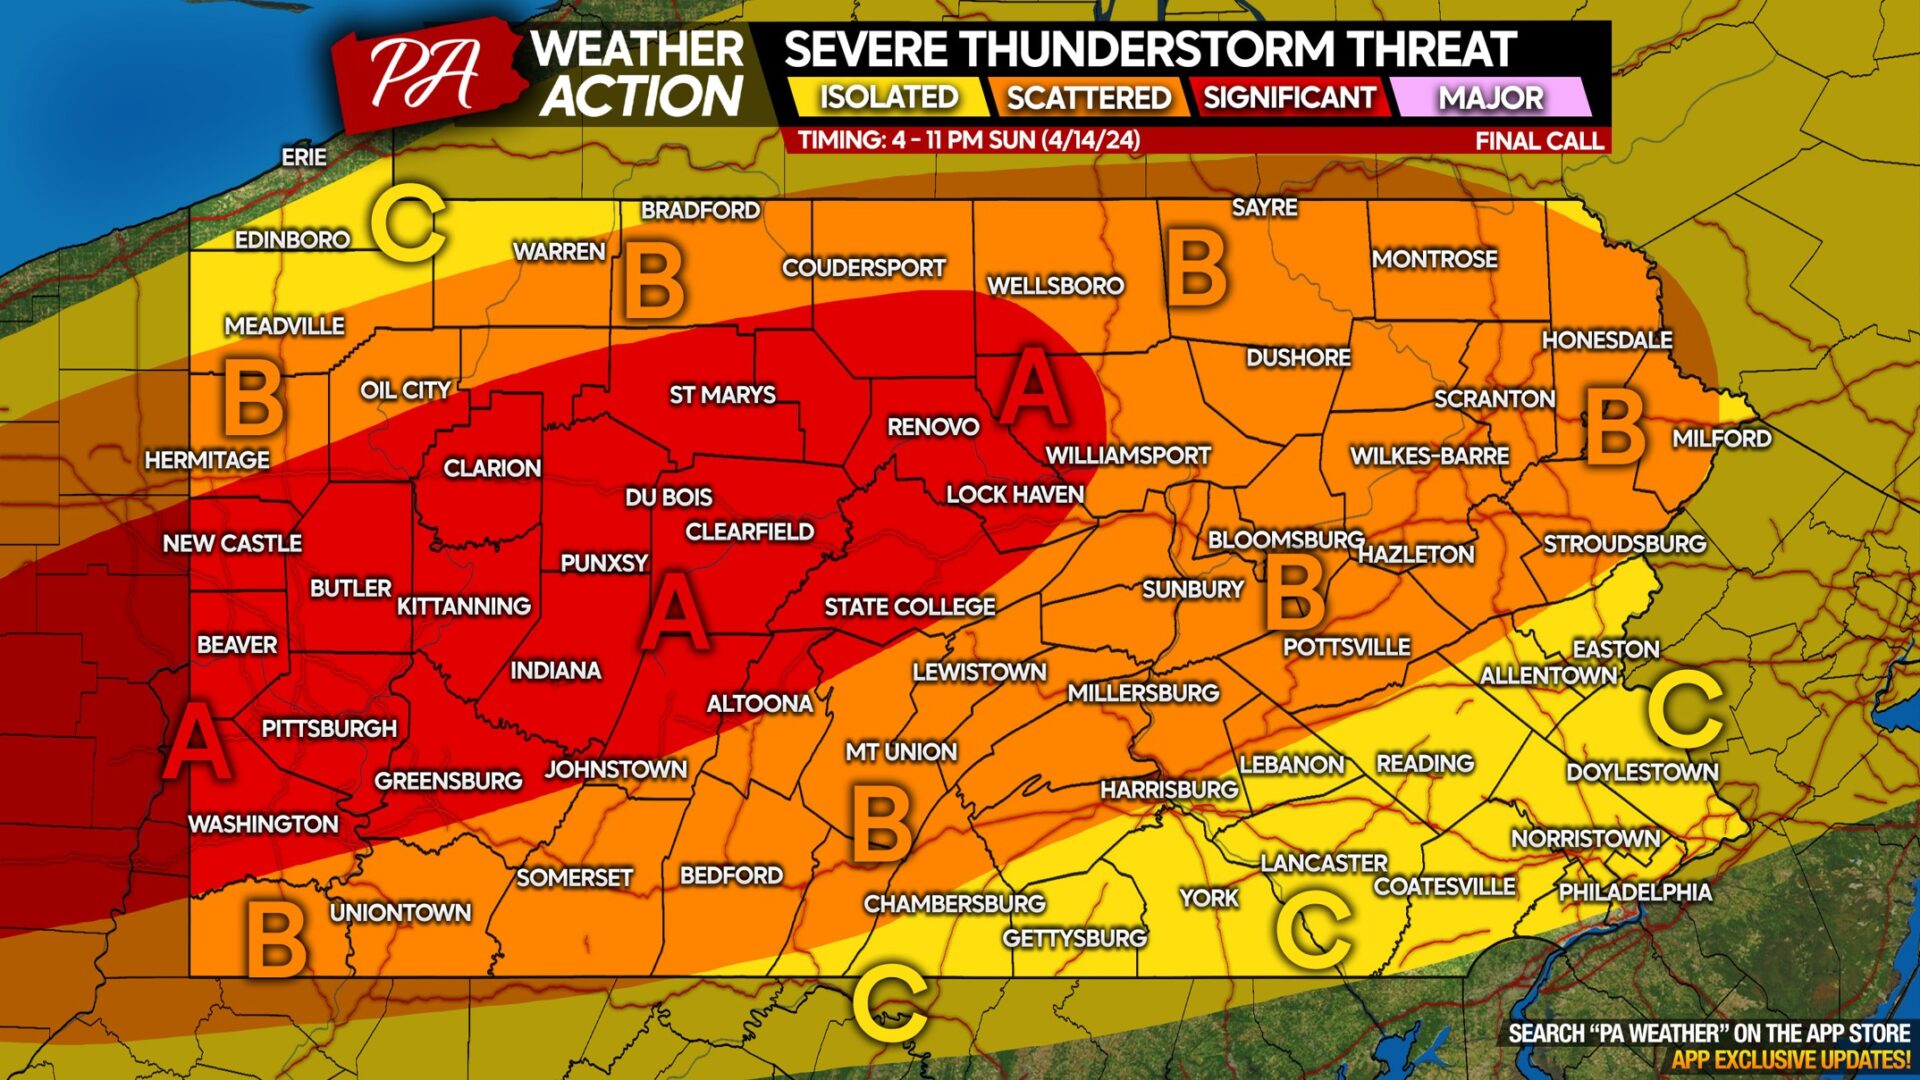 Significant Severe Thunderstorm Threat Sunday Across Parts of PA; Damaging Winds, Large Hail & A Few Tornadoes Possible